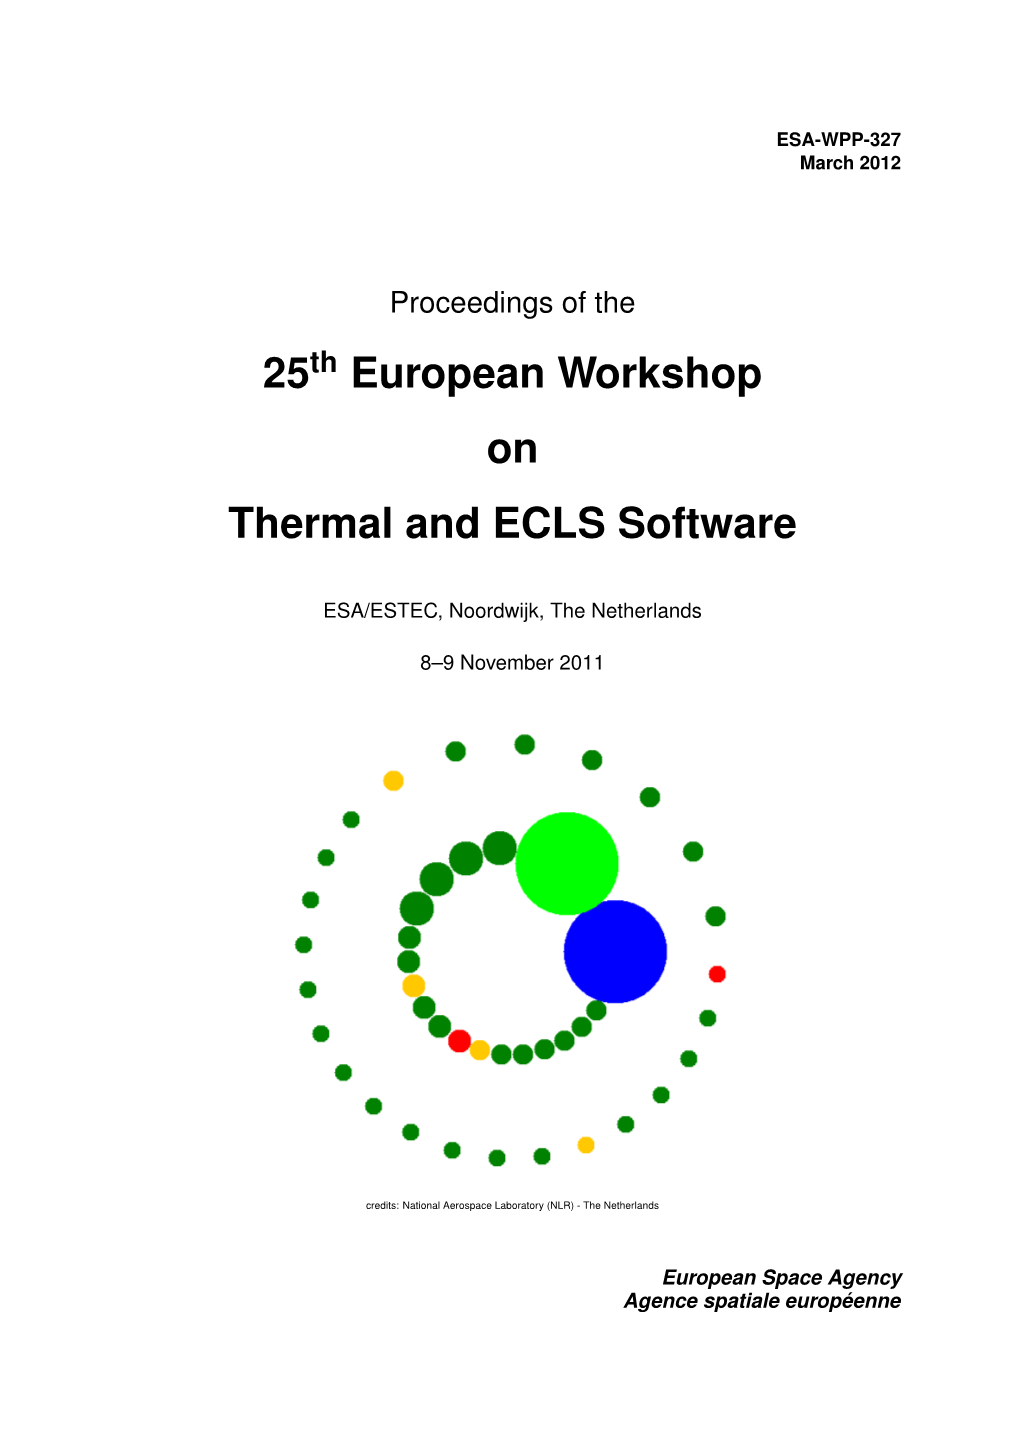 25 European Workshop on Thermal and ECLS Software